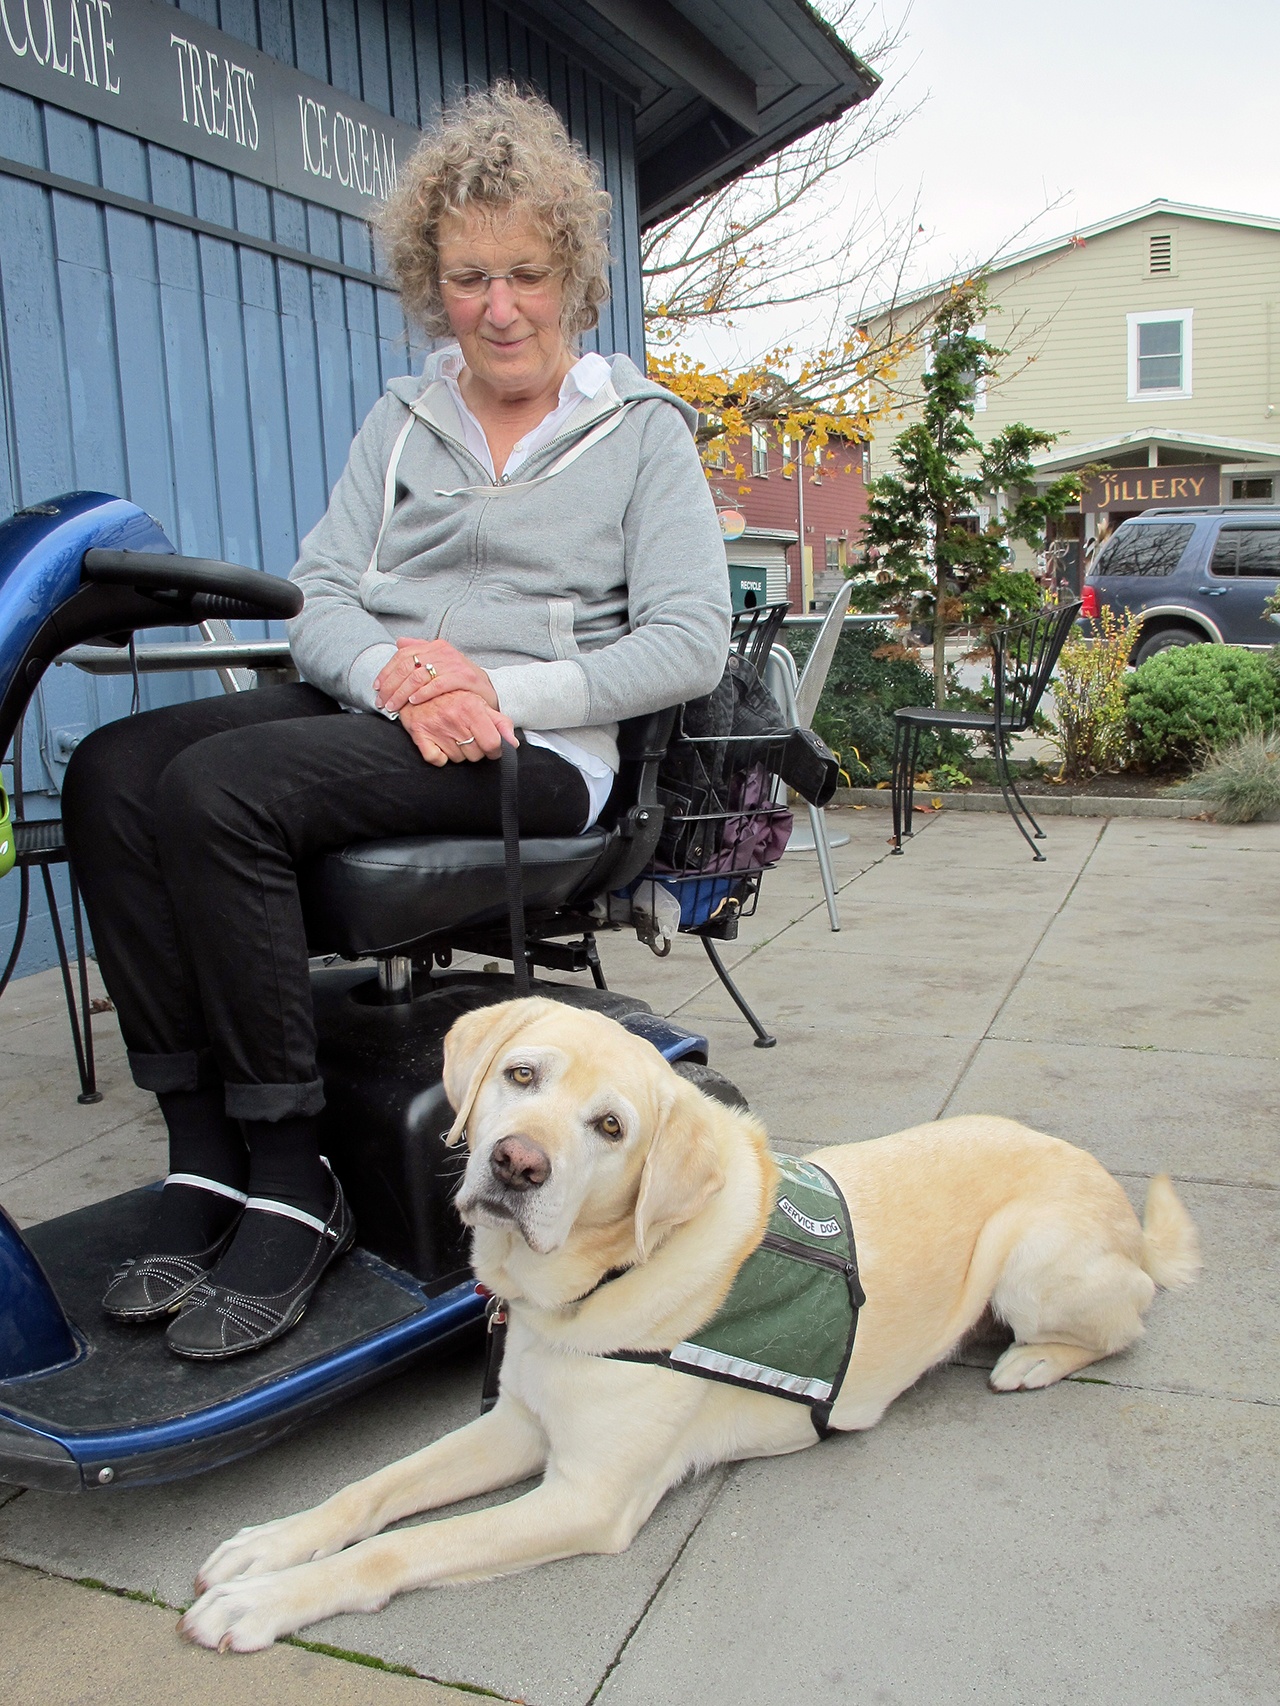 Dogs provide assistance to disabled islanders